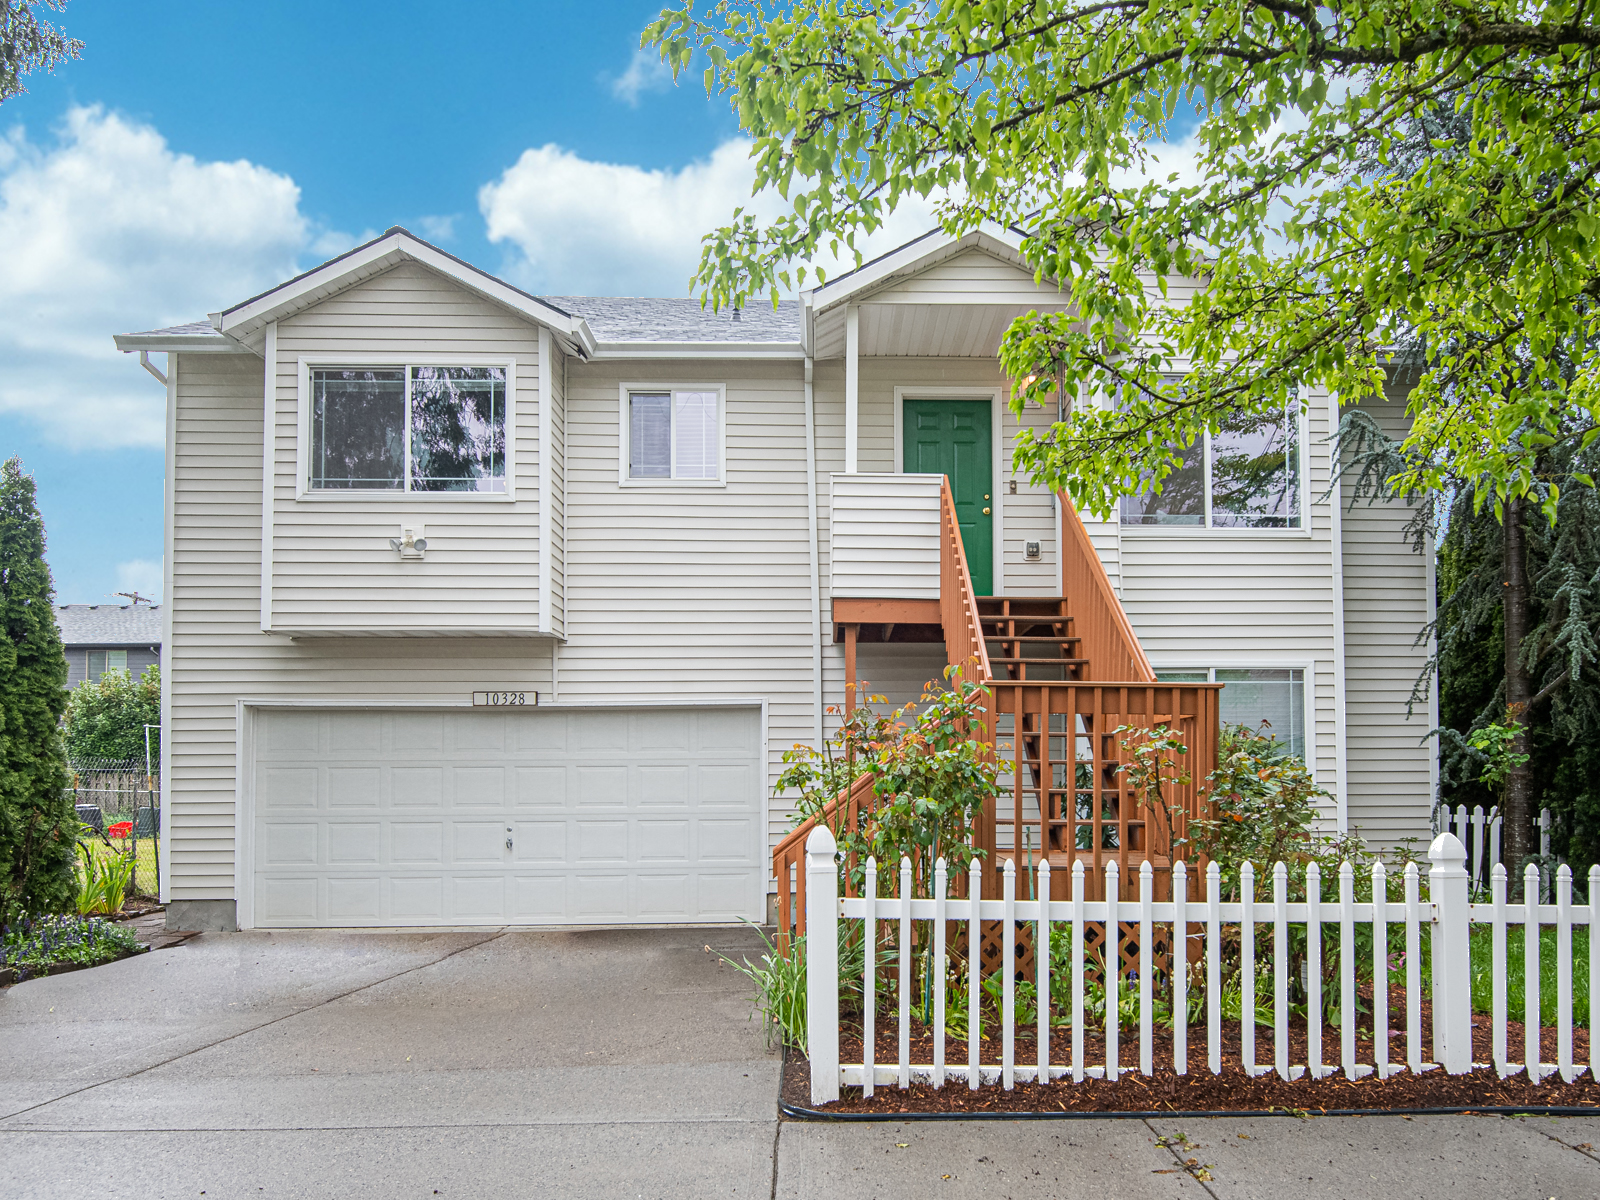 Just Listed: Turnkey + Room to Grow in Lents!